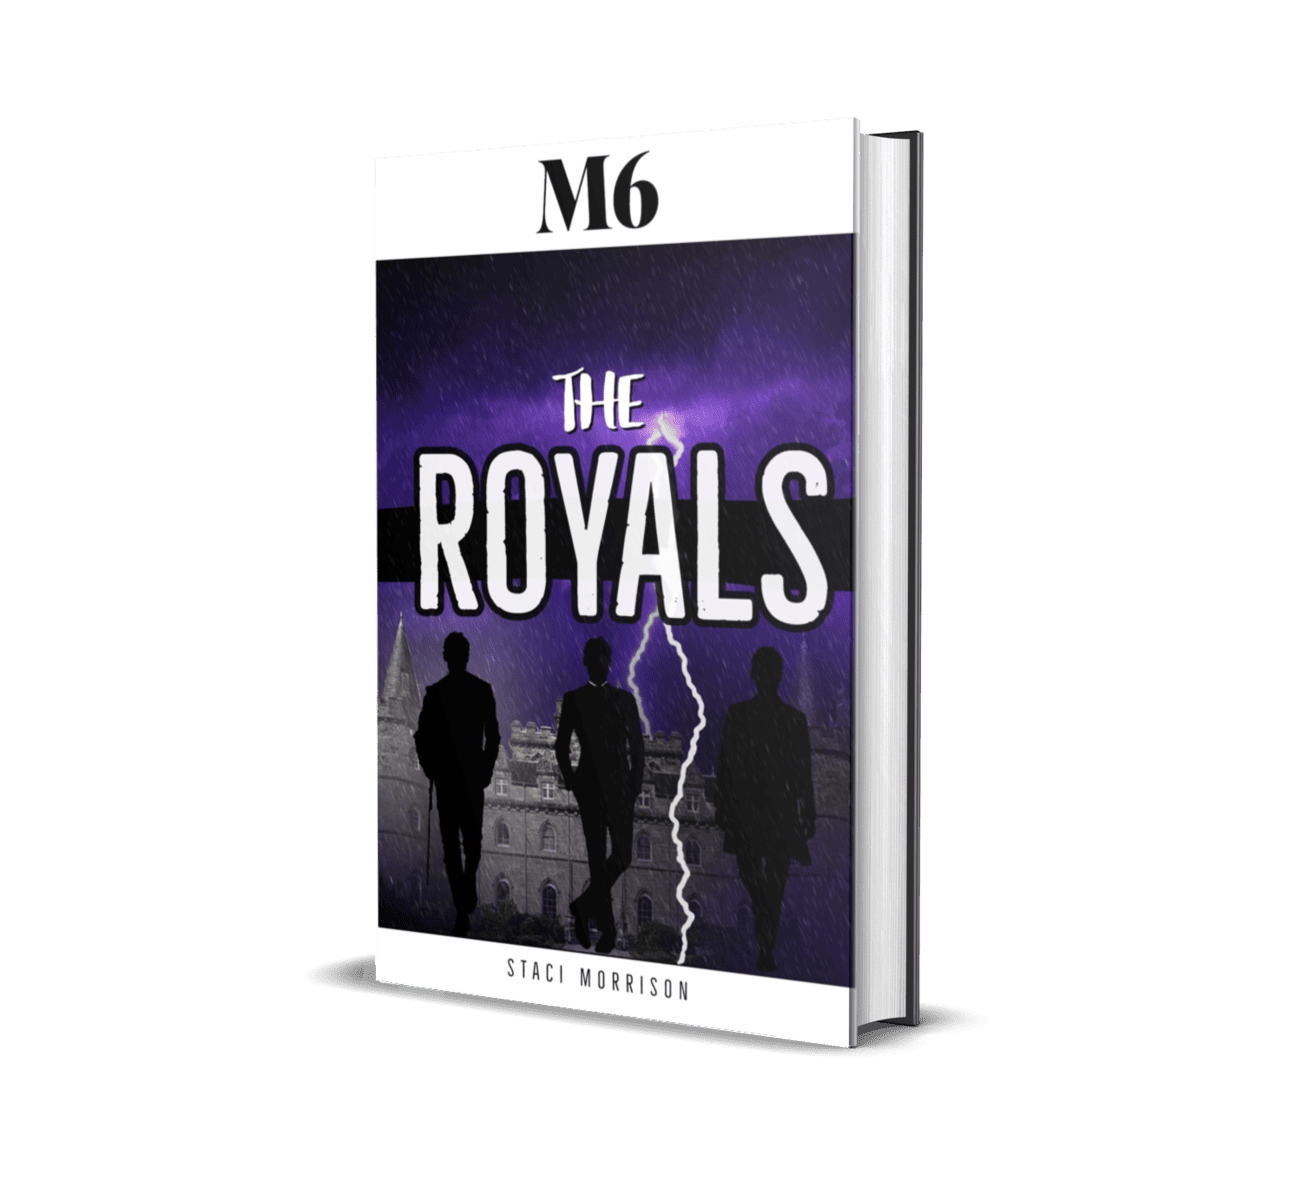 M6-the royals cover by staci morrison